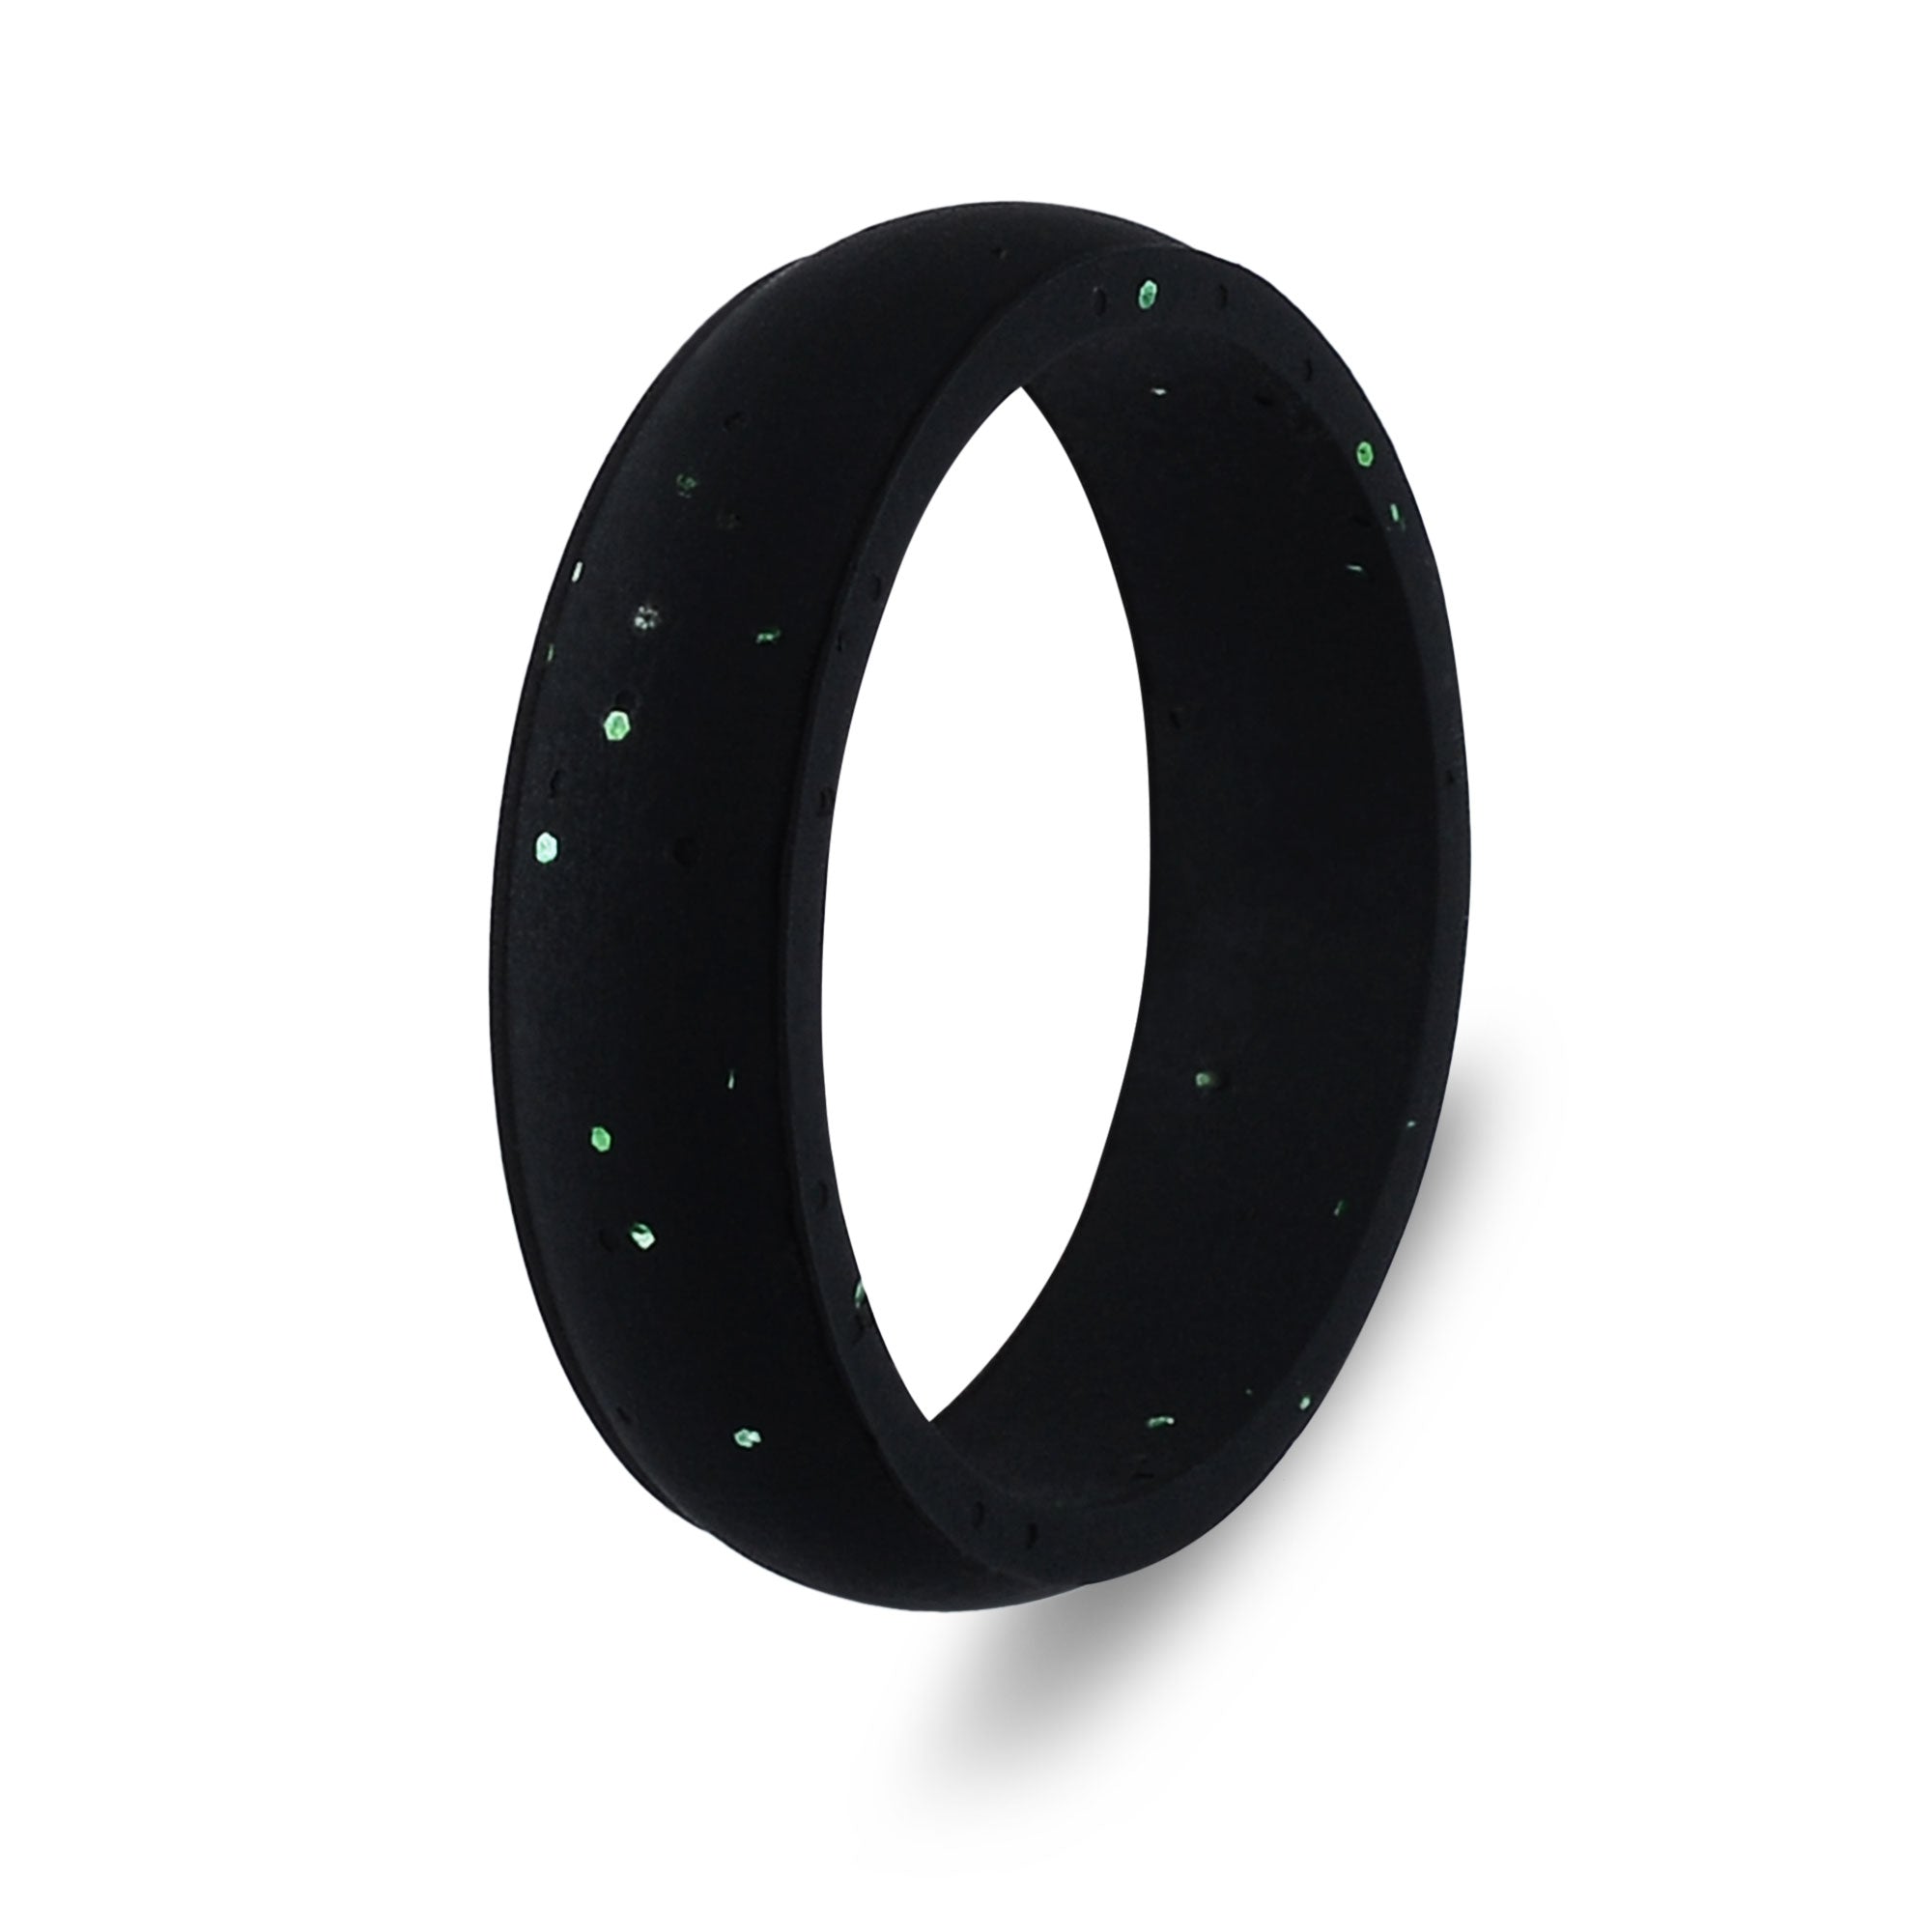 The Onyx Gleam - Silicone Ring